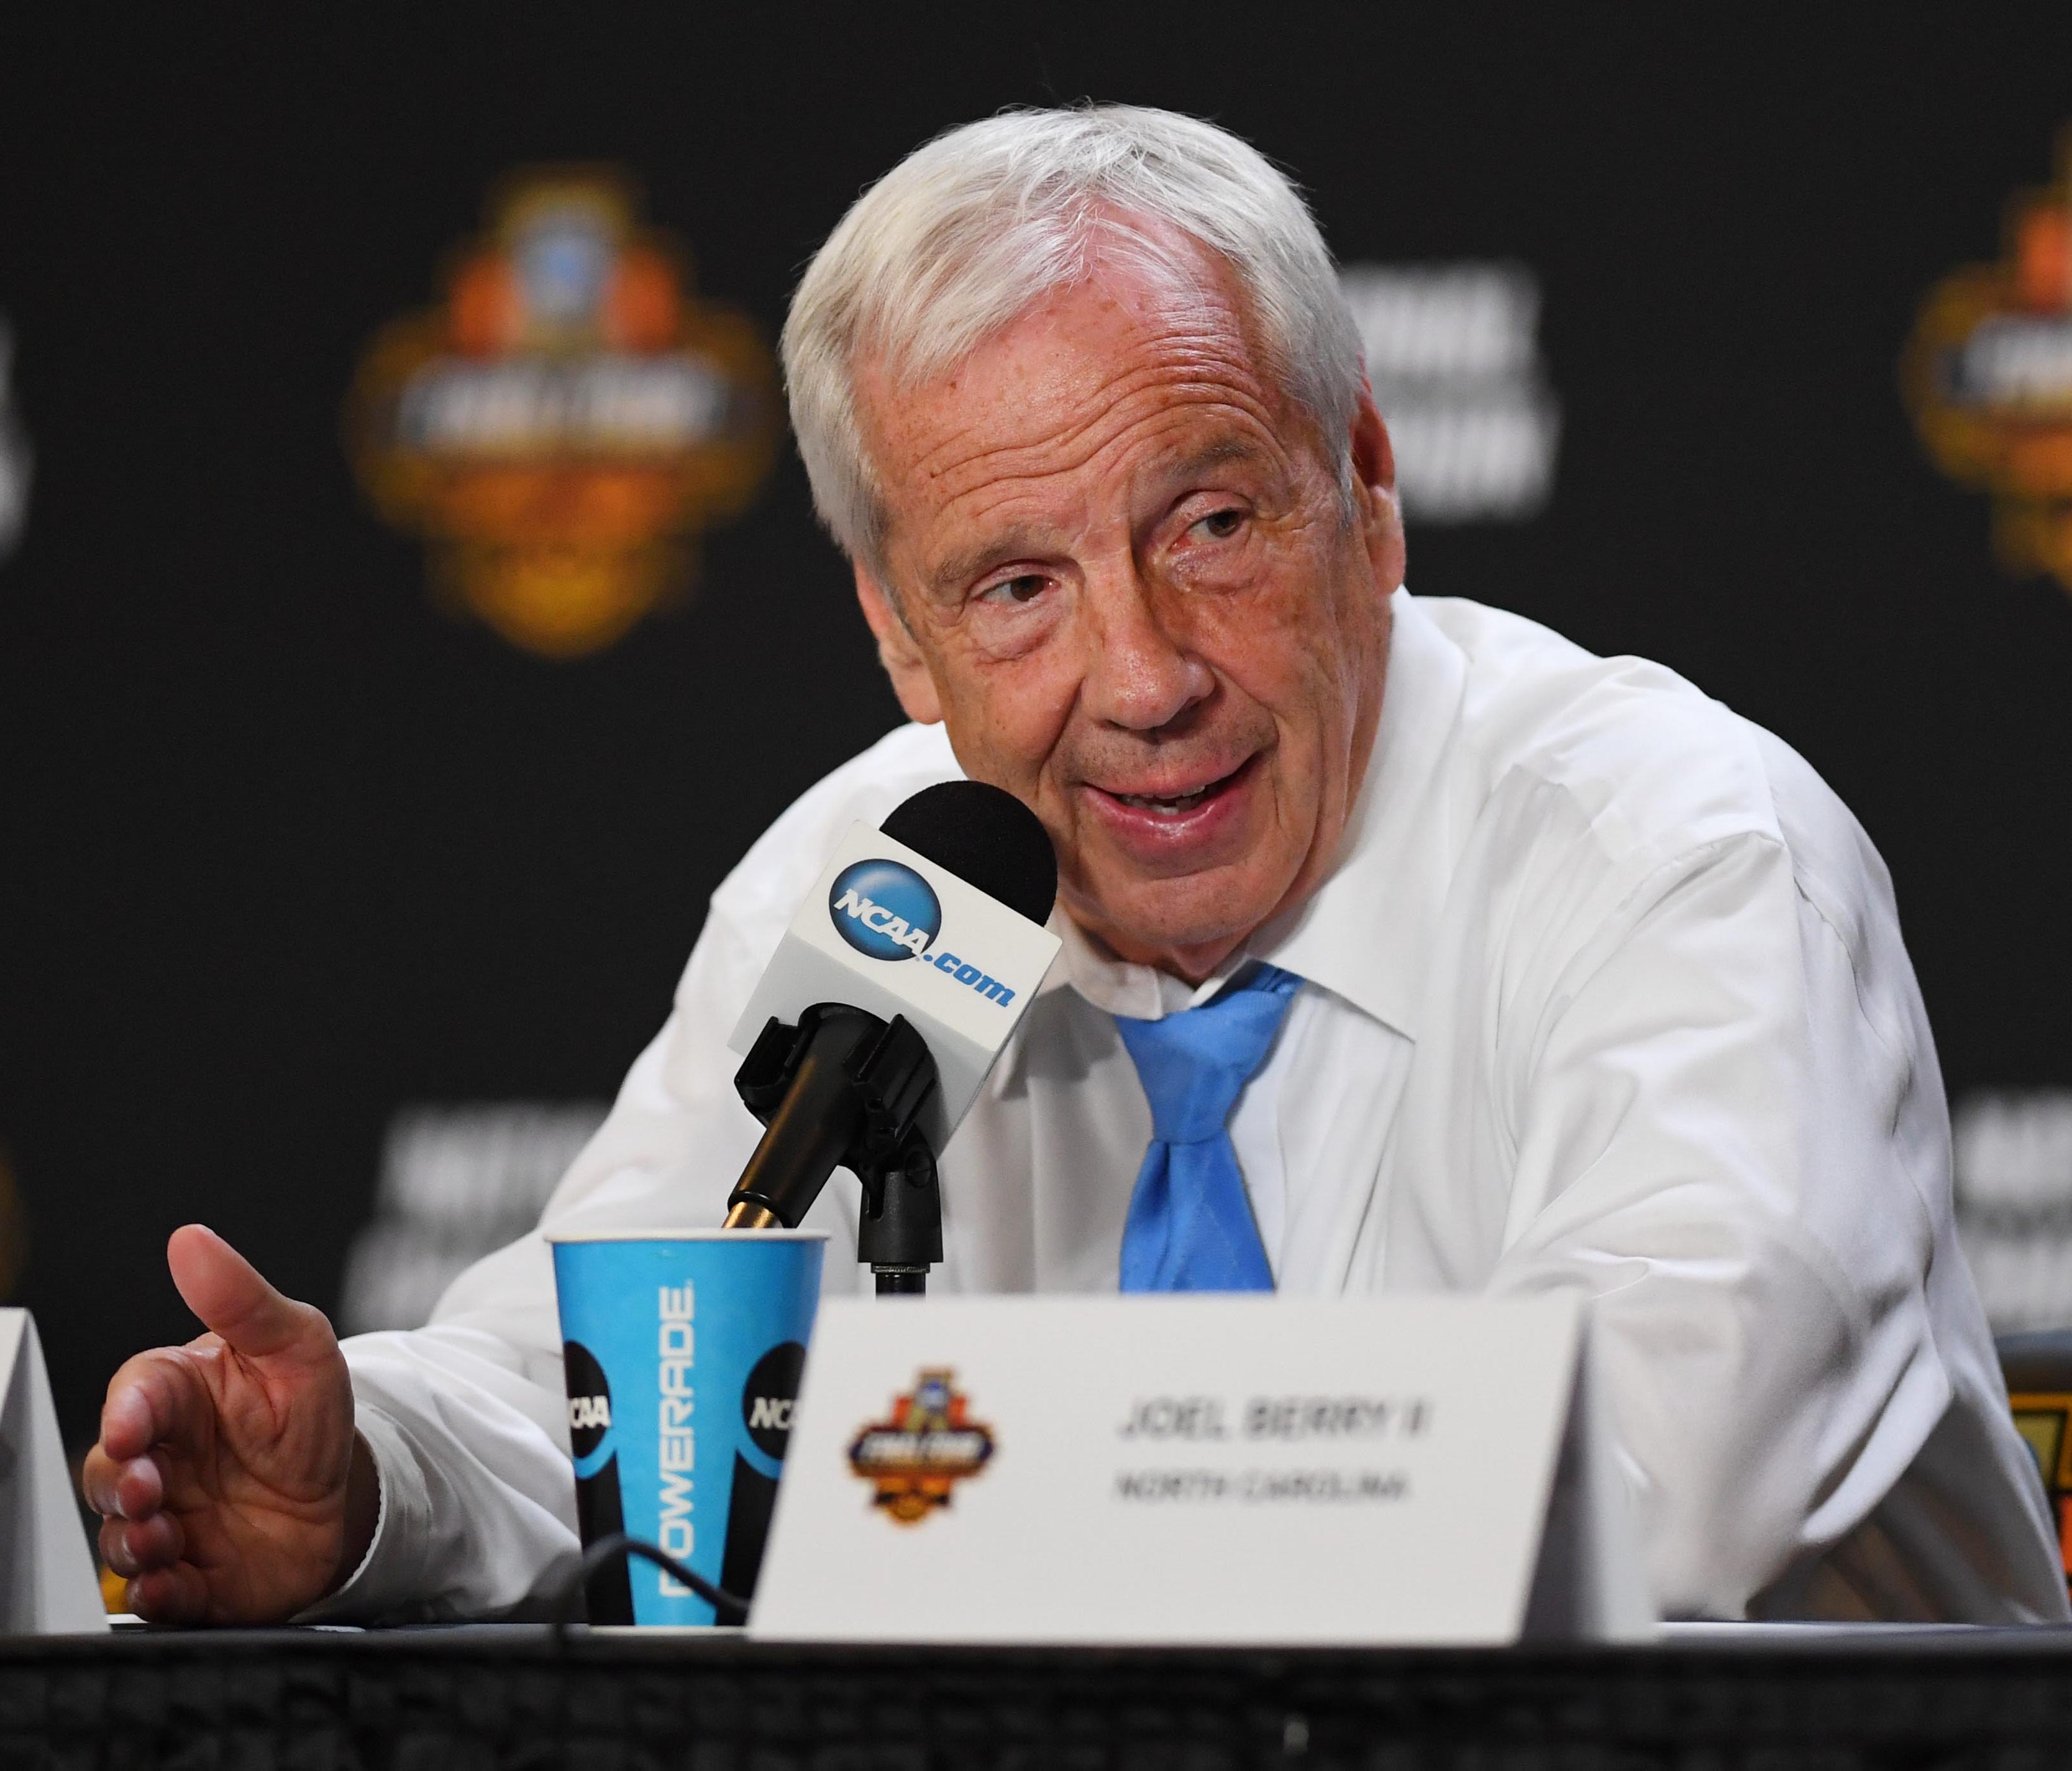 North Carolina Tar Heels head coach Roy Williams speaks at a press conference after defeating the Gonzaga Bulldogs in the championship game of the 2017 NCAA Men's Final Four at University of Phoenix Stadium.